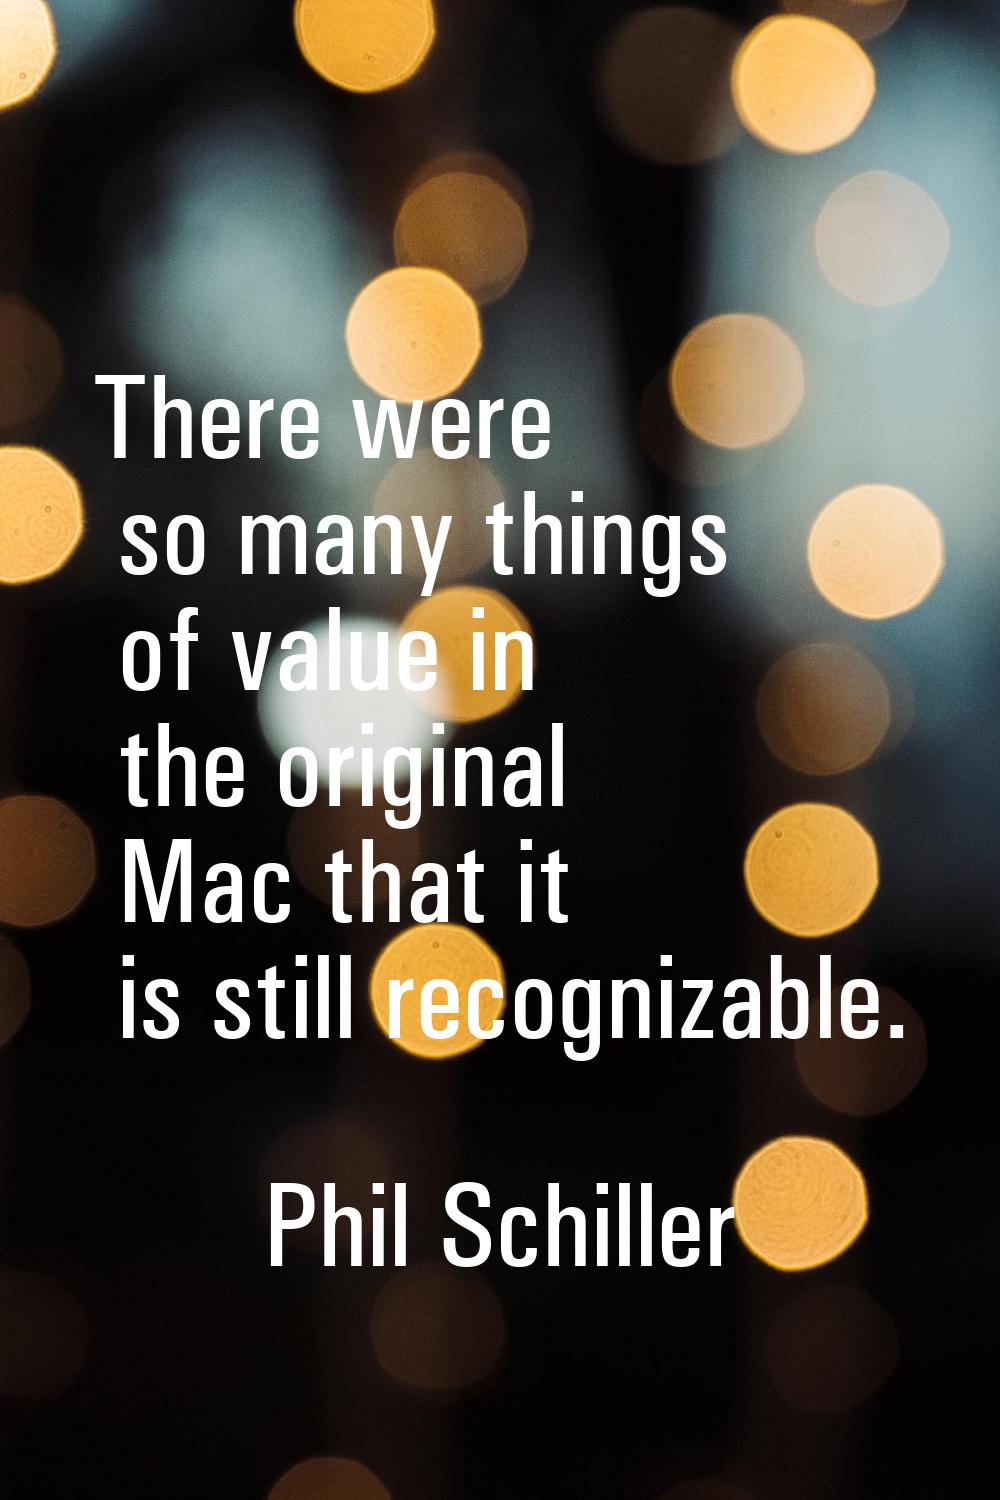 There were so many things of value in the original Mac that it is still recognizable.